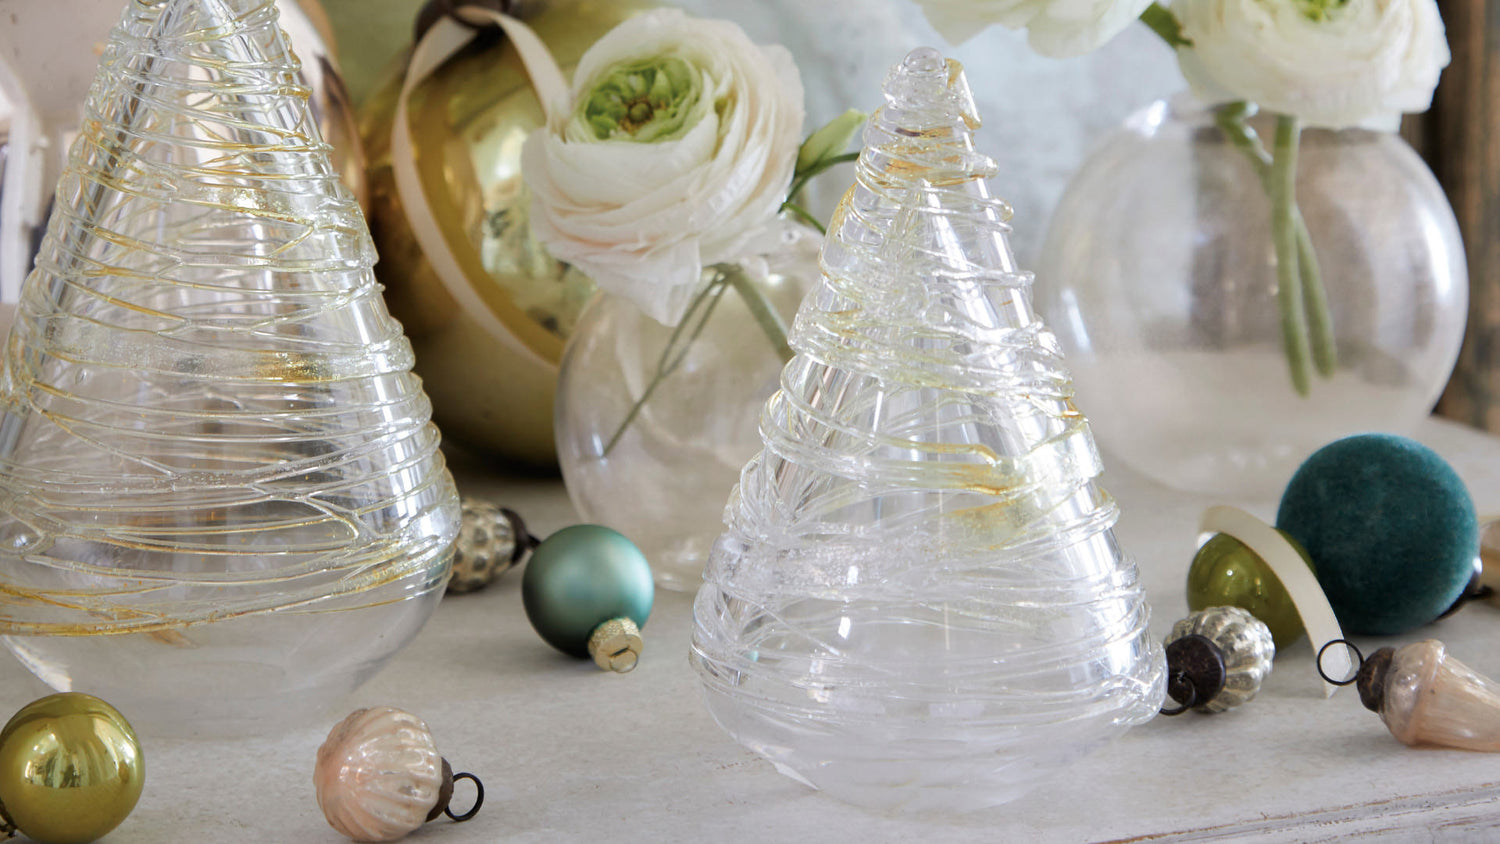 Fall, Christmas and Holiday Gifts - glass Christmas trees and ornaments and glass vases